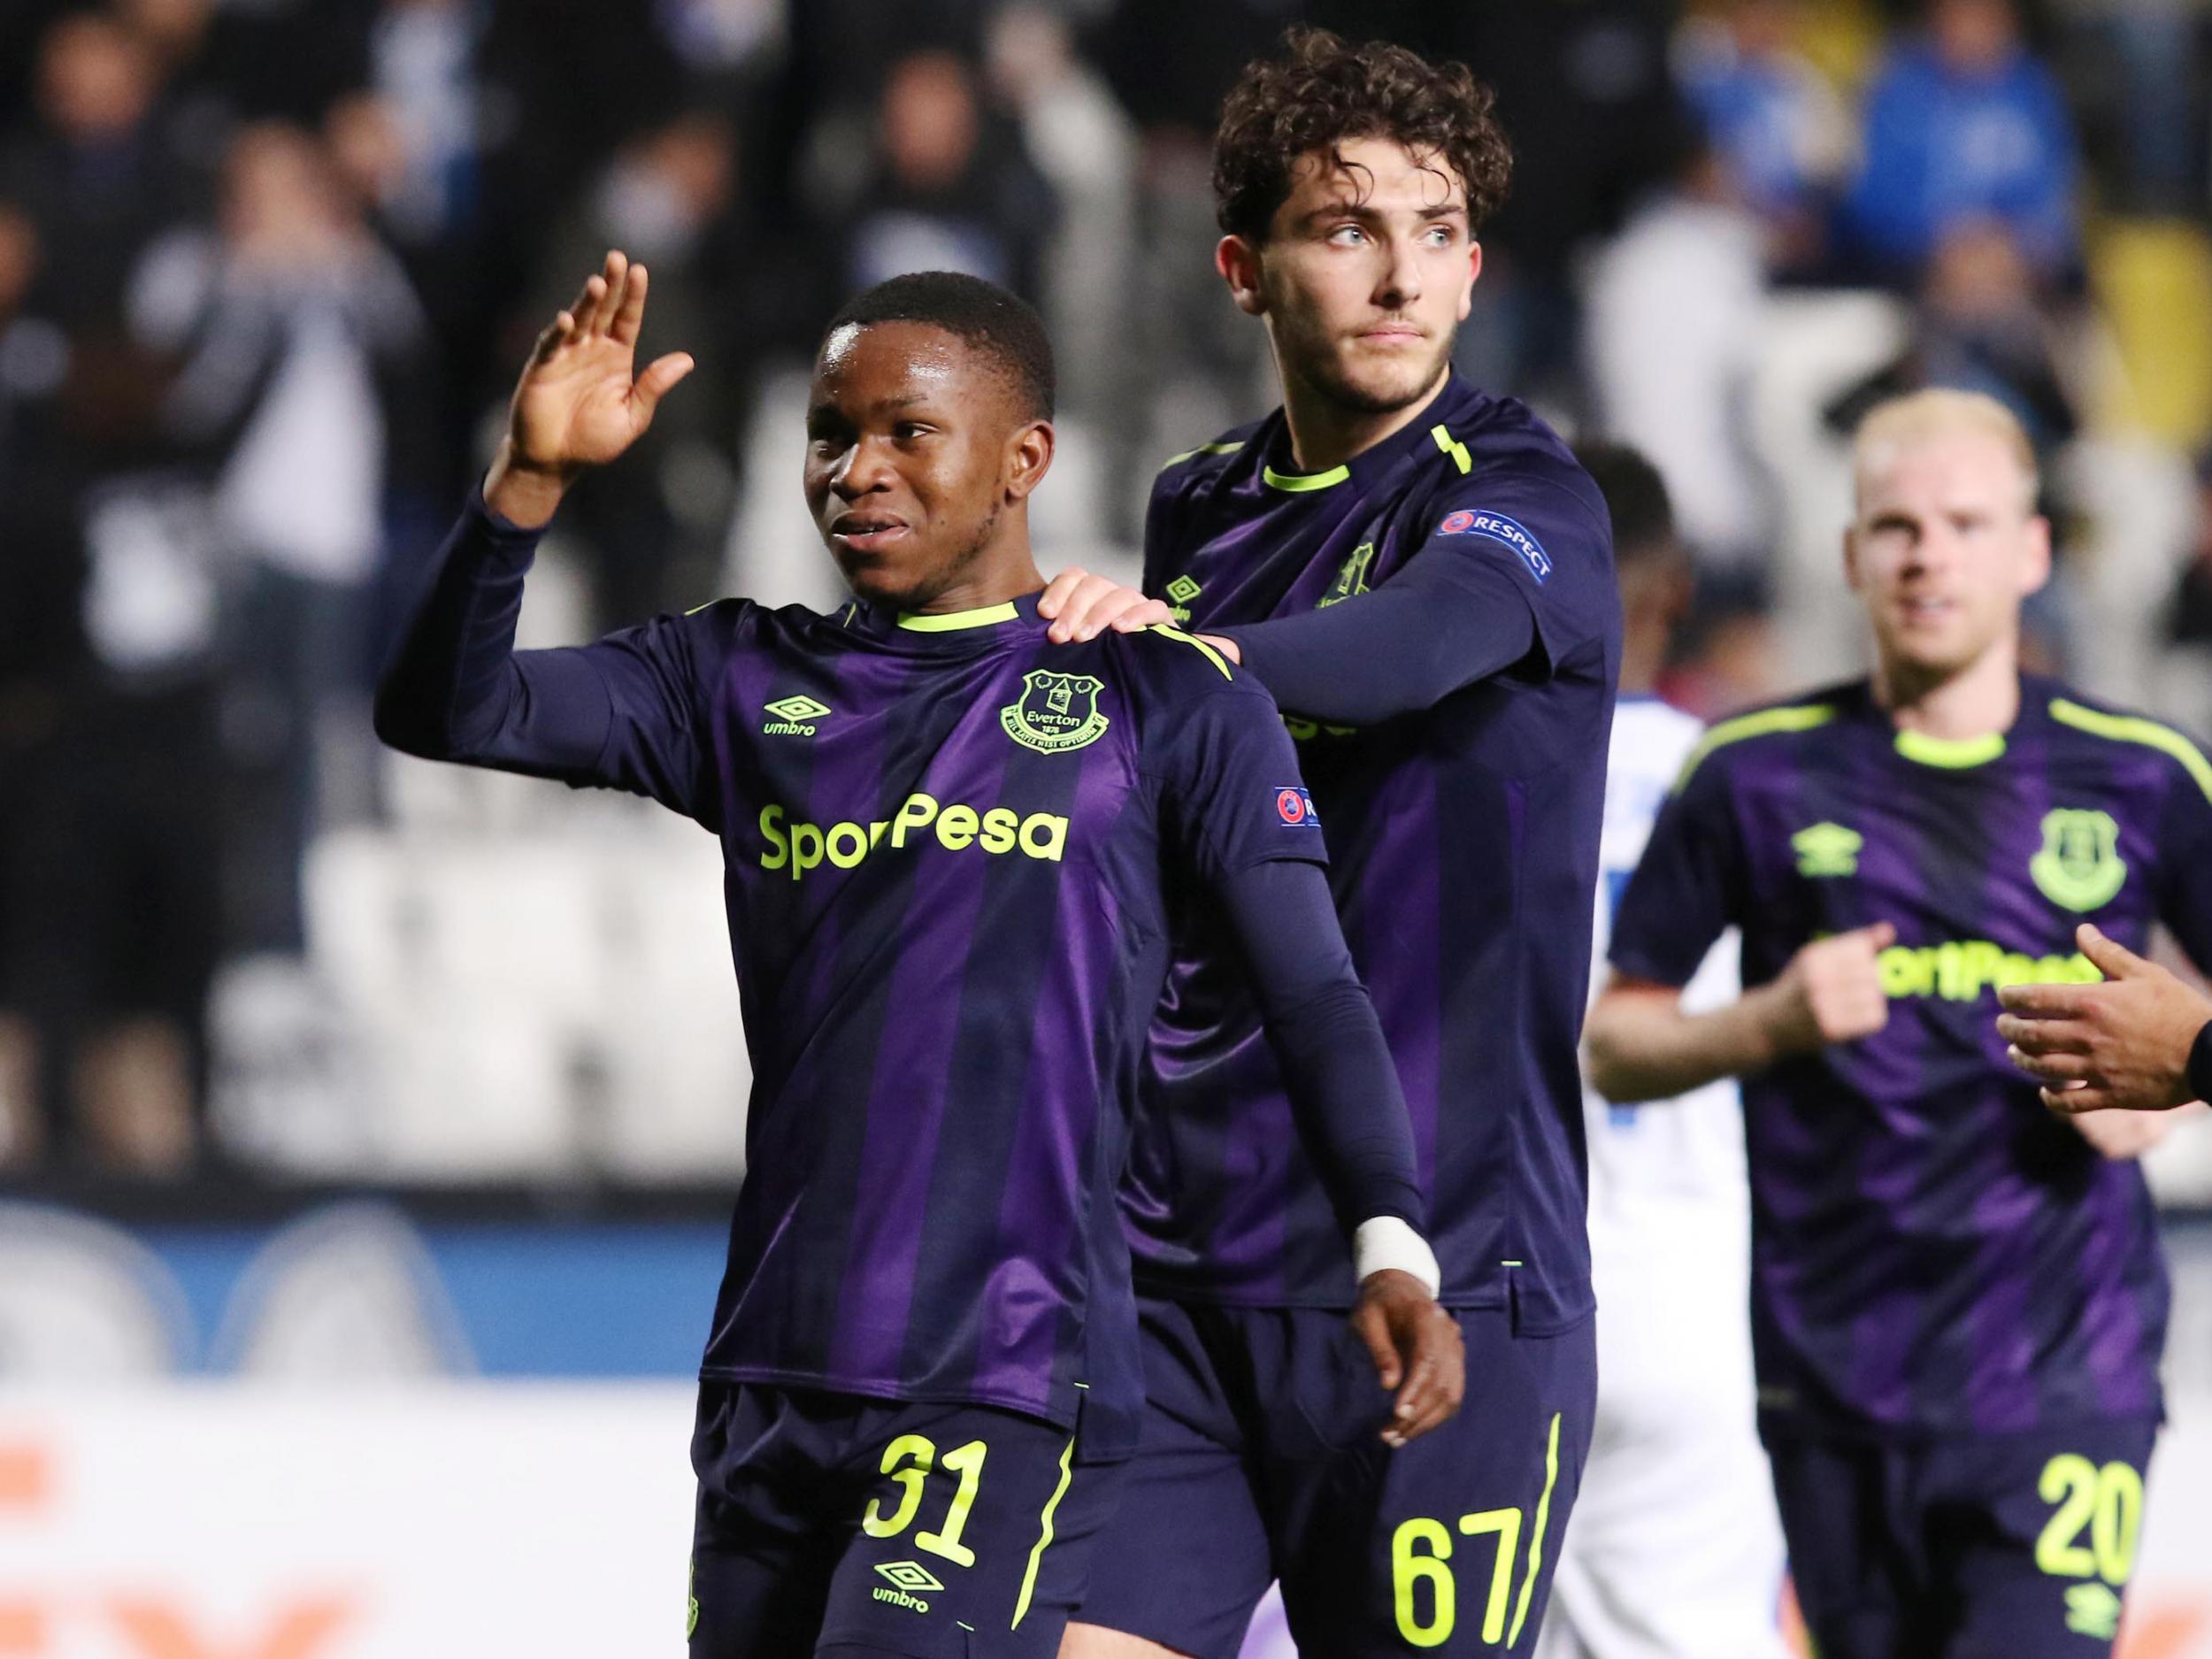 Lookman was one of a number of youngsters playing